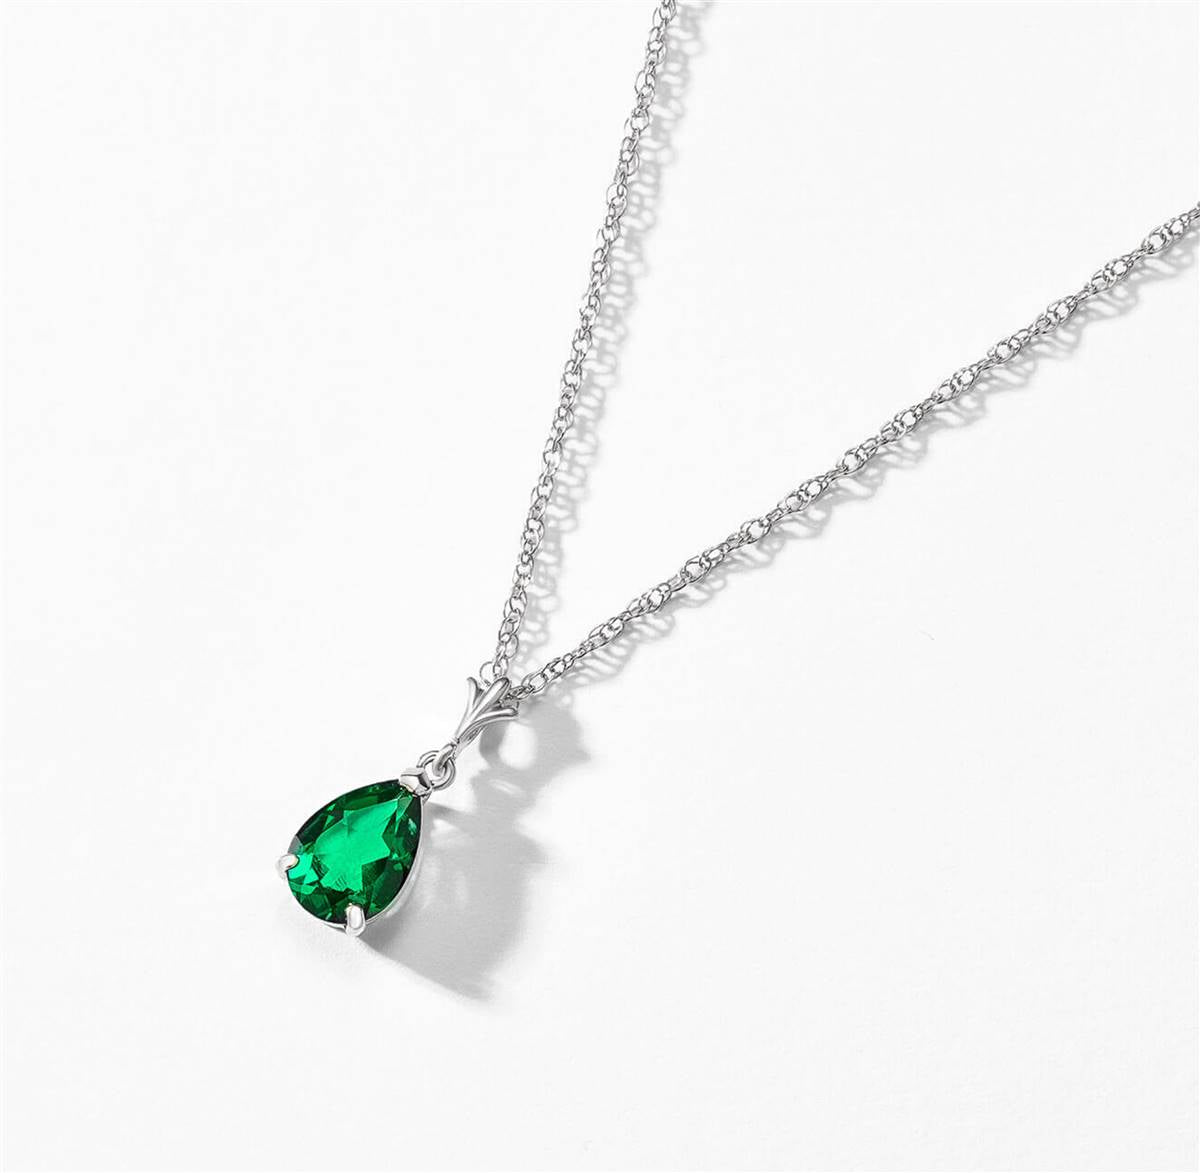 14K Solid White Gold Necklace With Pear Shape 1.00 ctw High Polished Genuine Emerald - Grade AAA